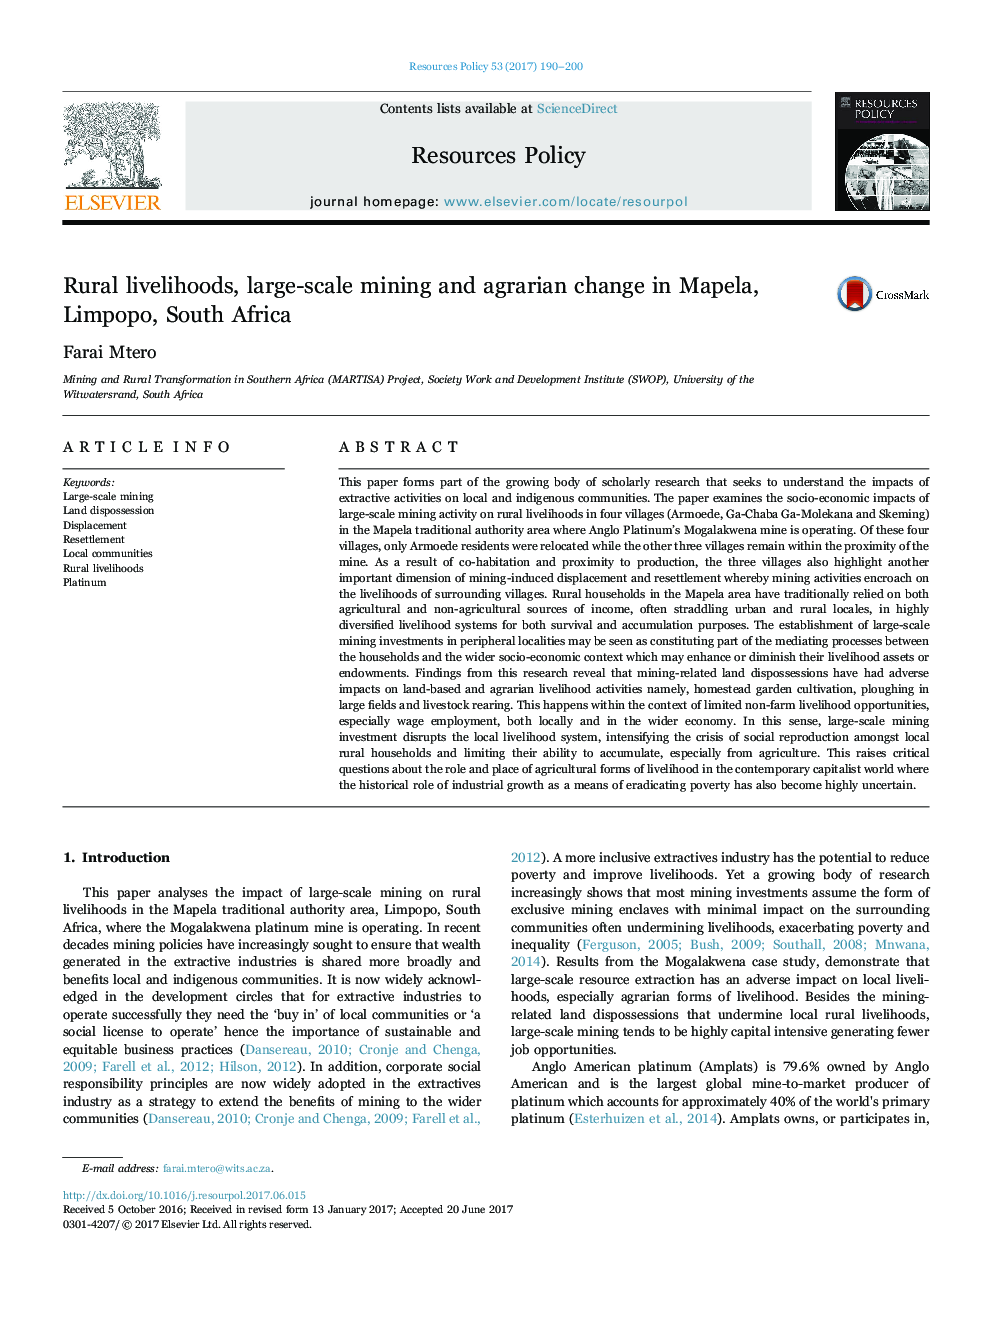 Rural livelihoods, large-scale mining and agrarian change in Mapela, Limpopo, South Africa